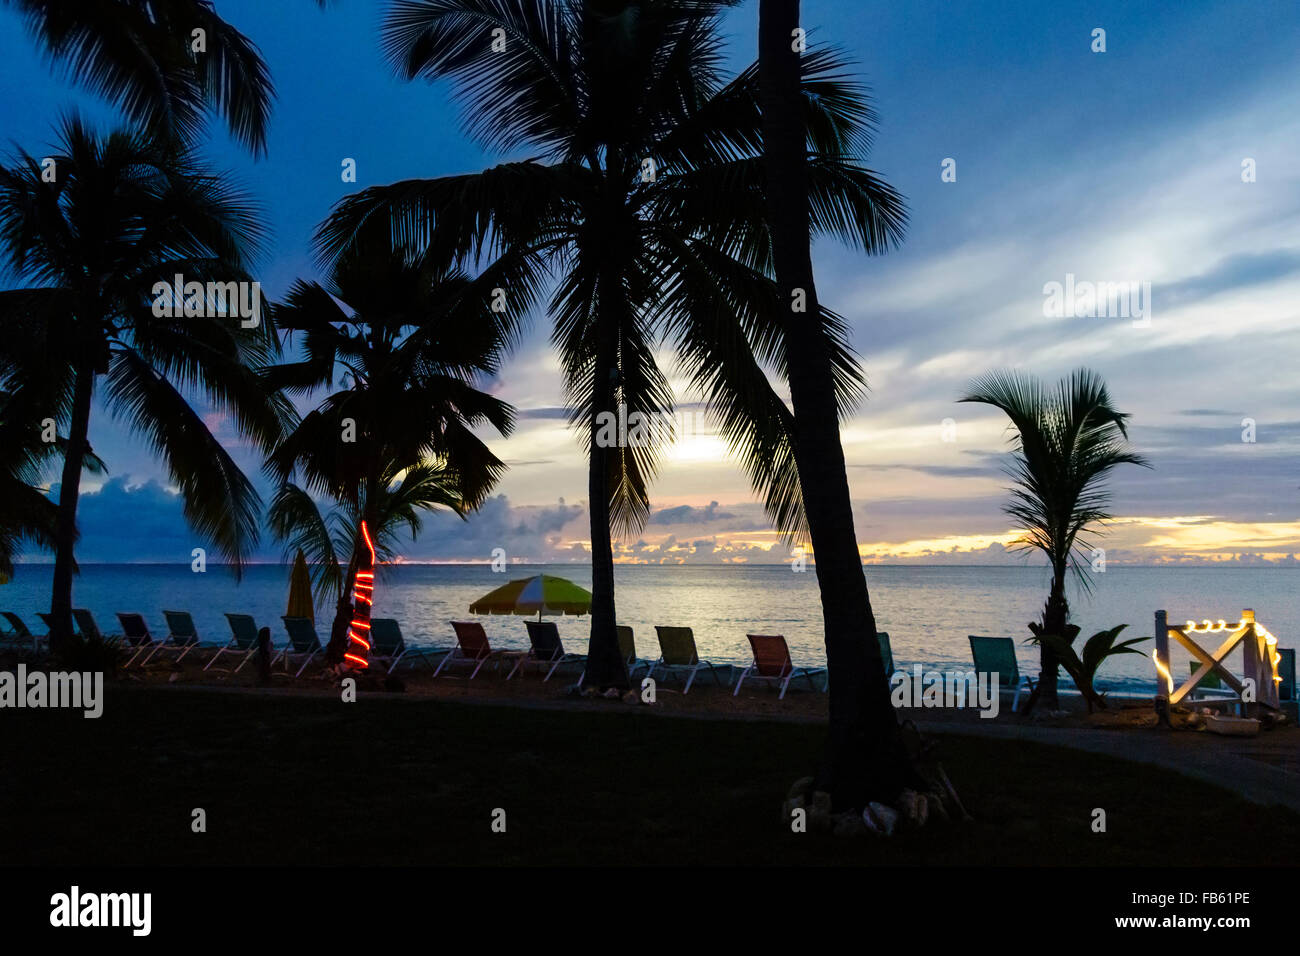 The sun sets over the Caribbean sea at a beachside resort on St. Croix, U.S. Virgin Islands. Stock Photo